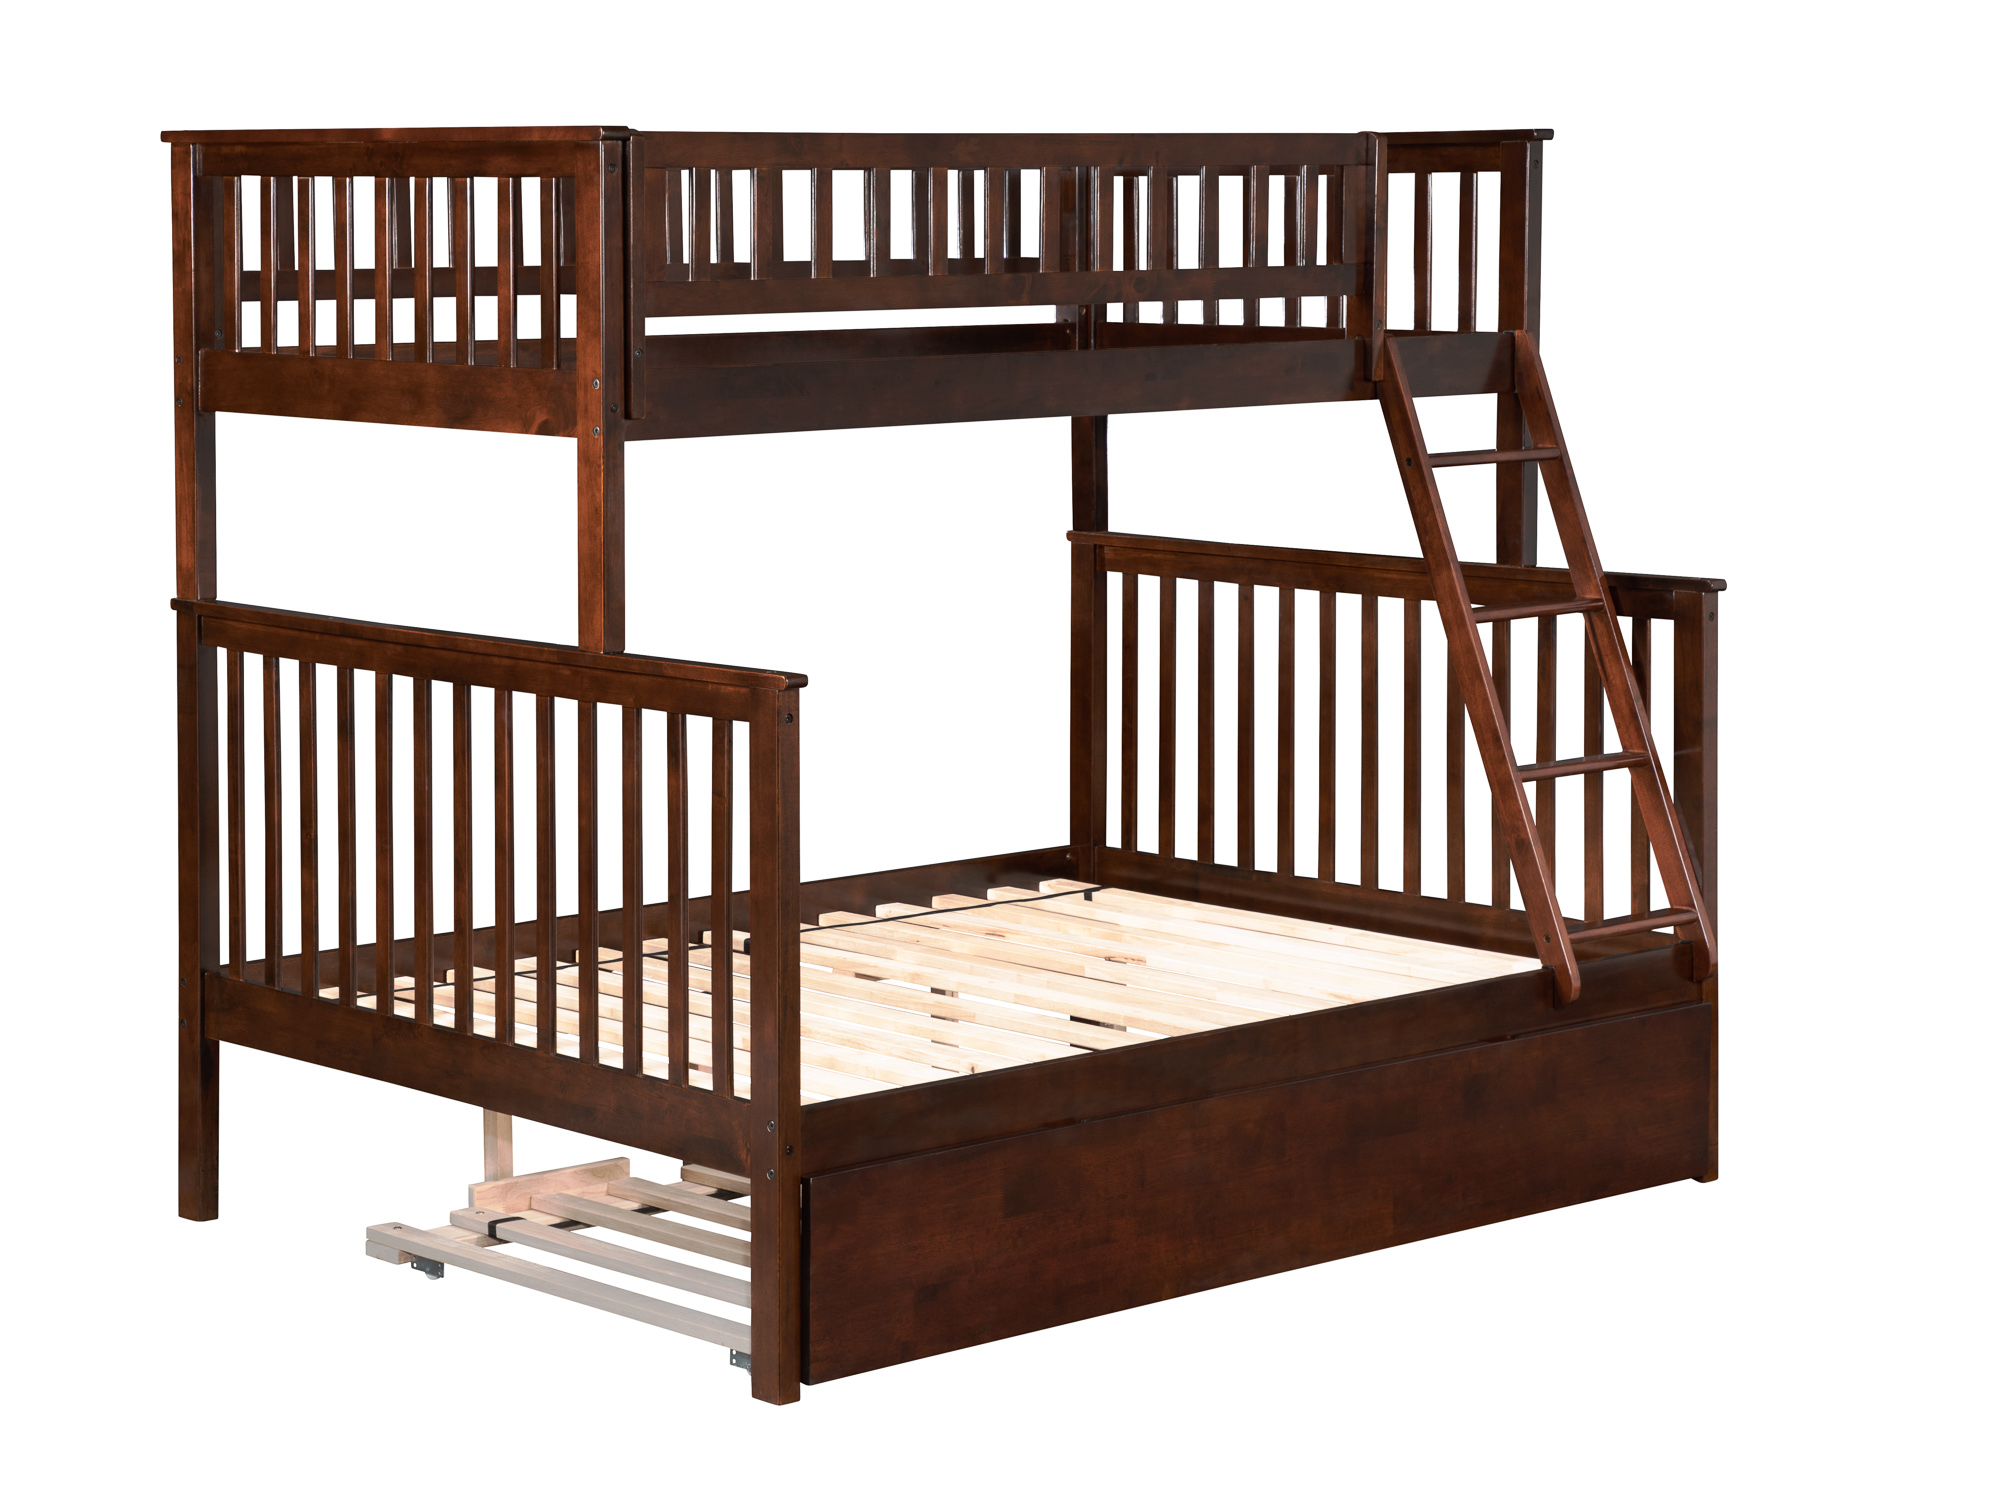 Woodland Bunk Bed Twin over Full with Full Size Urban Trundle Bed in Walnut - image 2 of 7